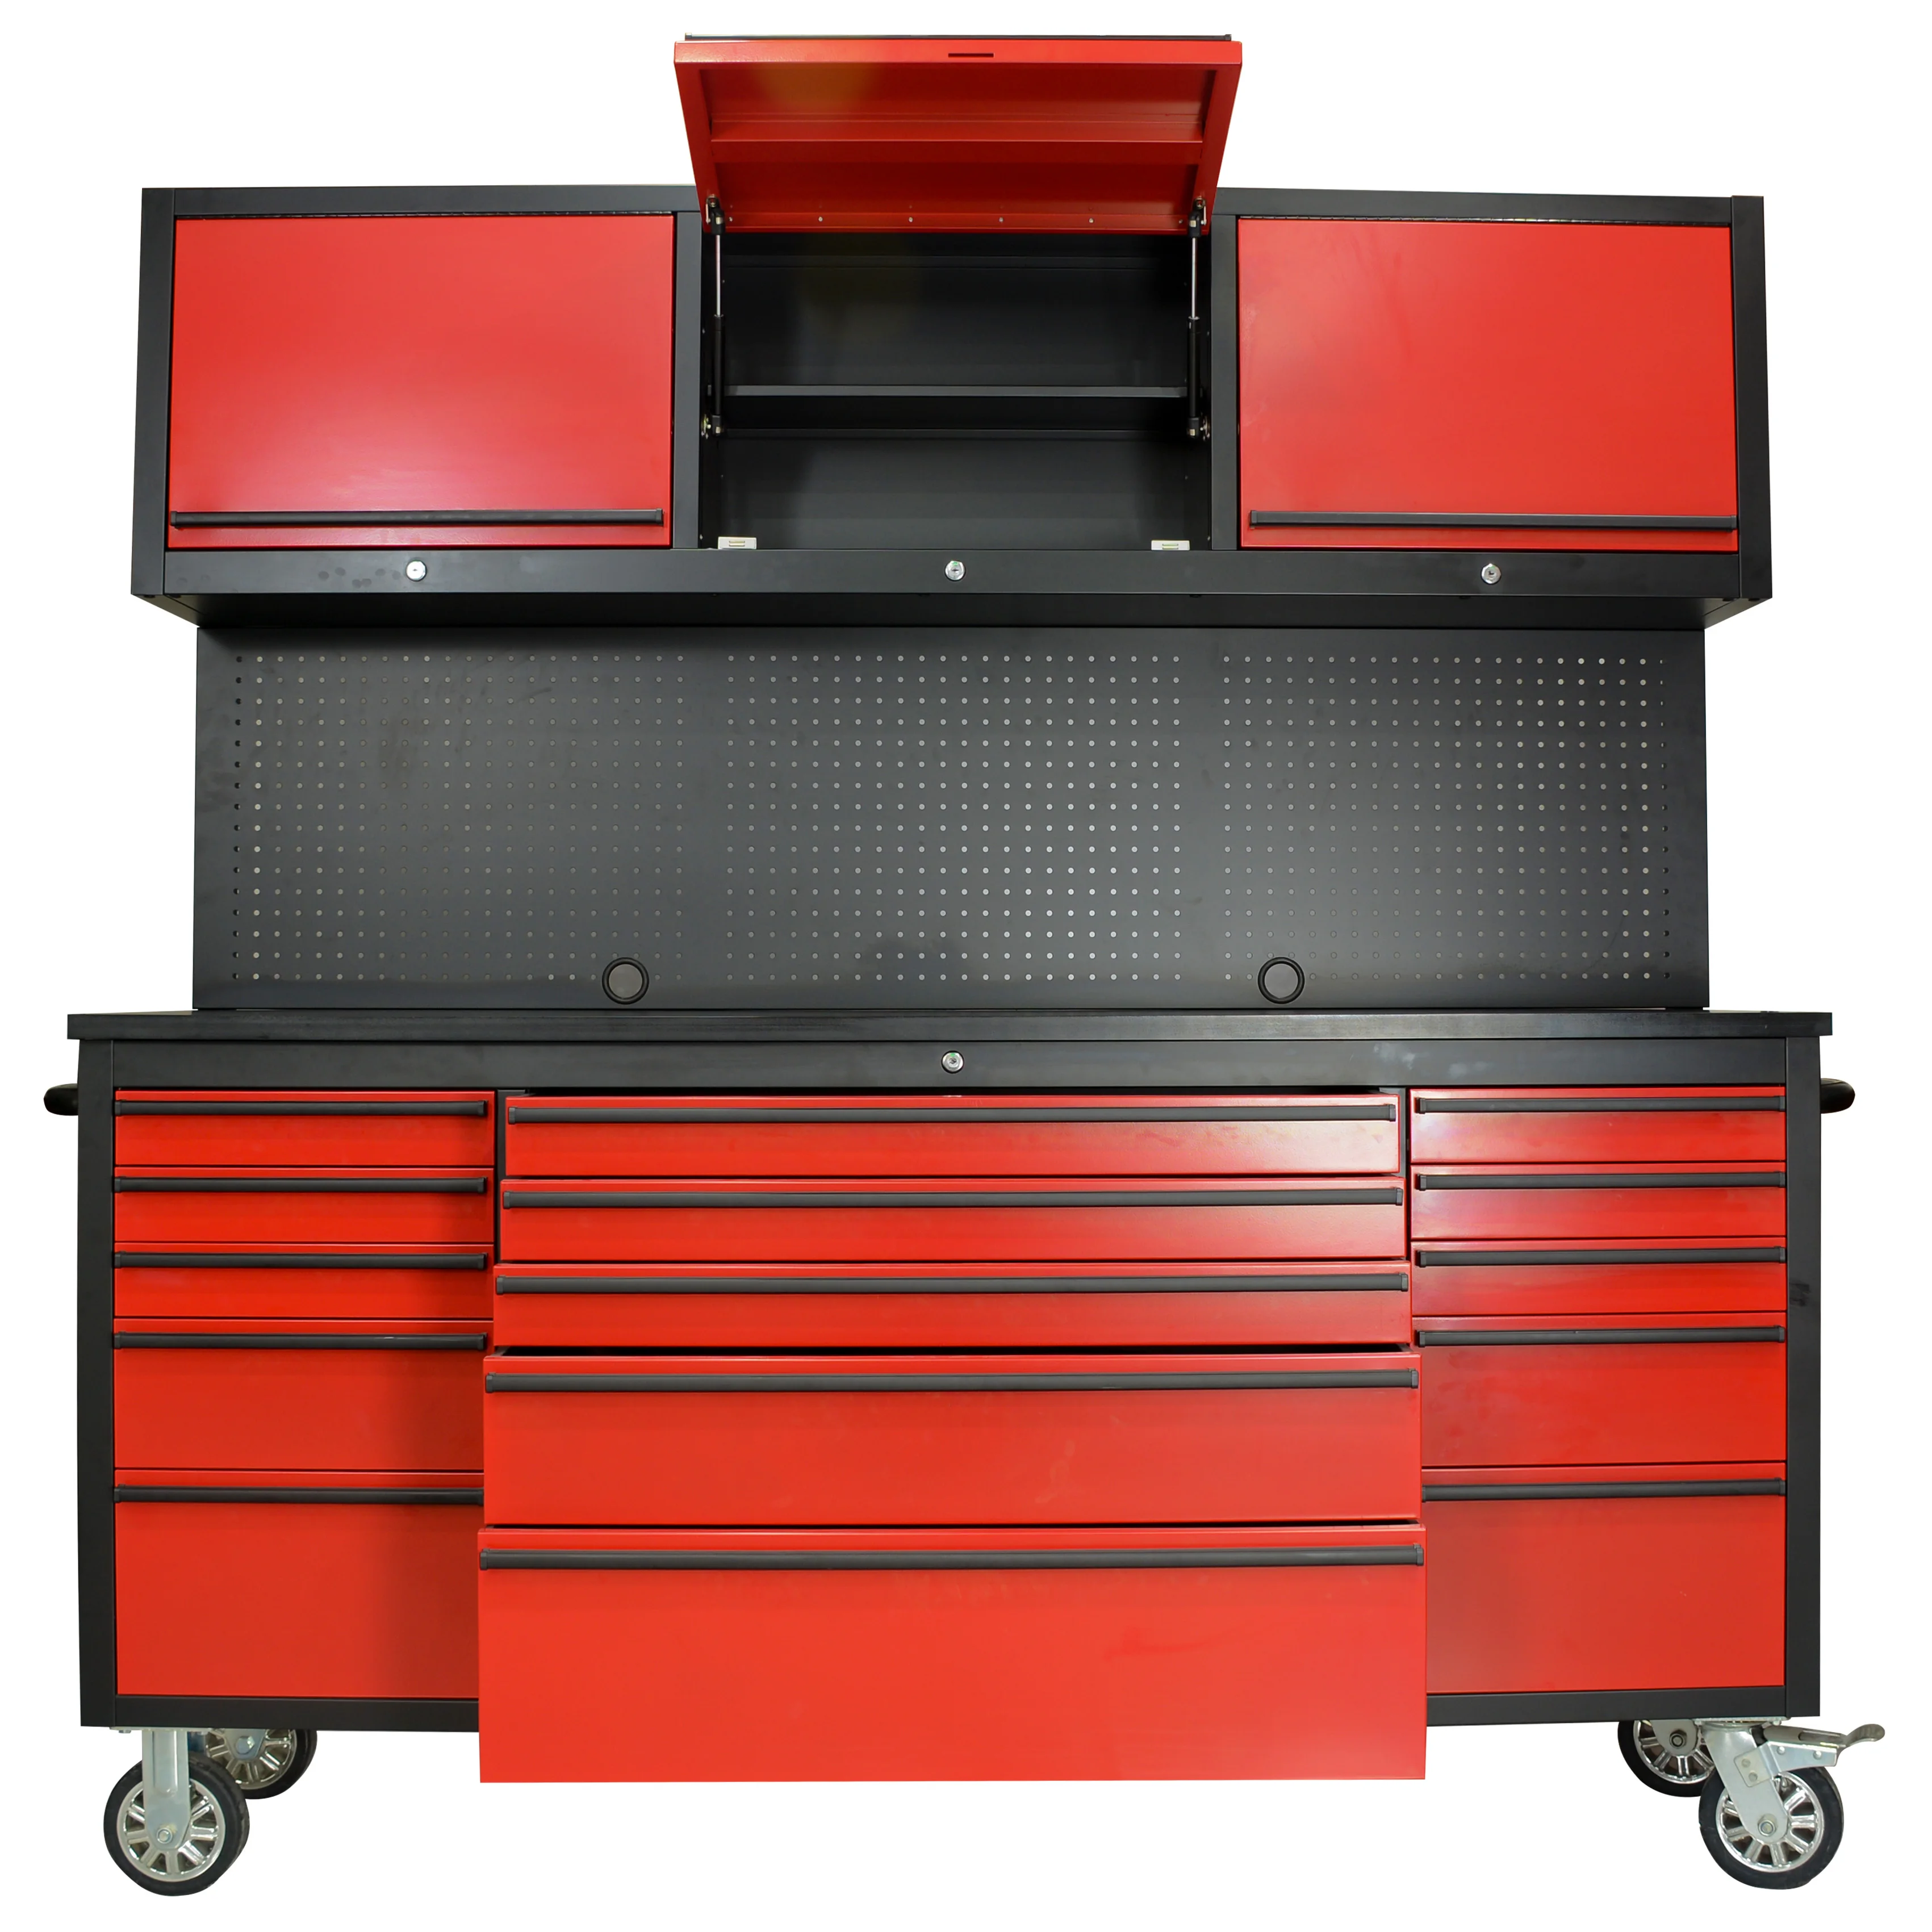 Hyxion Gereedschapskasten Profession Workbench Garage Cabinet Workshop Drawers Cabinets - Buy Stainless Workbench Bench,Garage Tool Cabinet Workshop,Tool Drawers Product on Alibaba.com